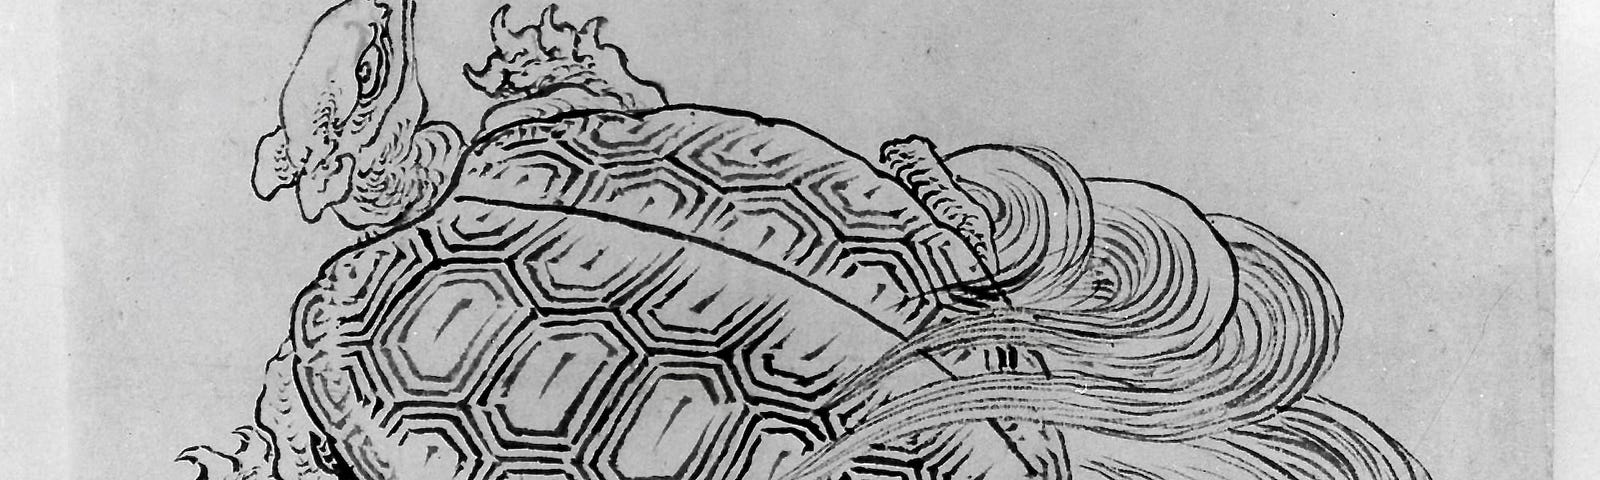 Drawing of a turtle with a tail by an Edo-era master of woodblock prints, Hokusai.